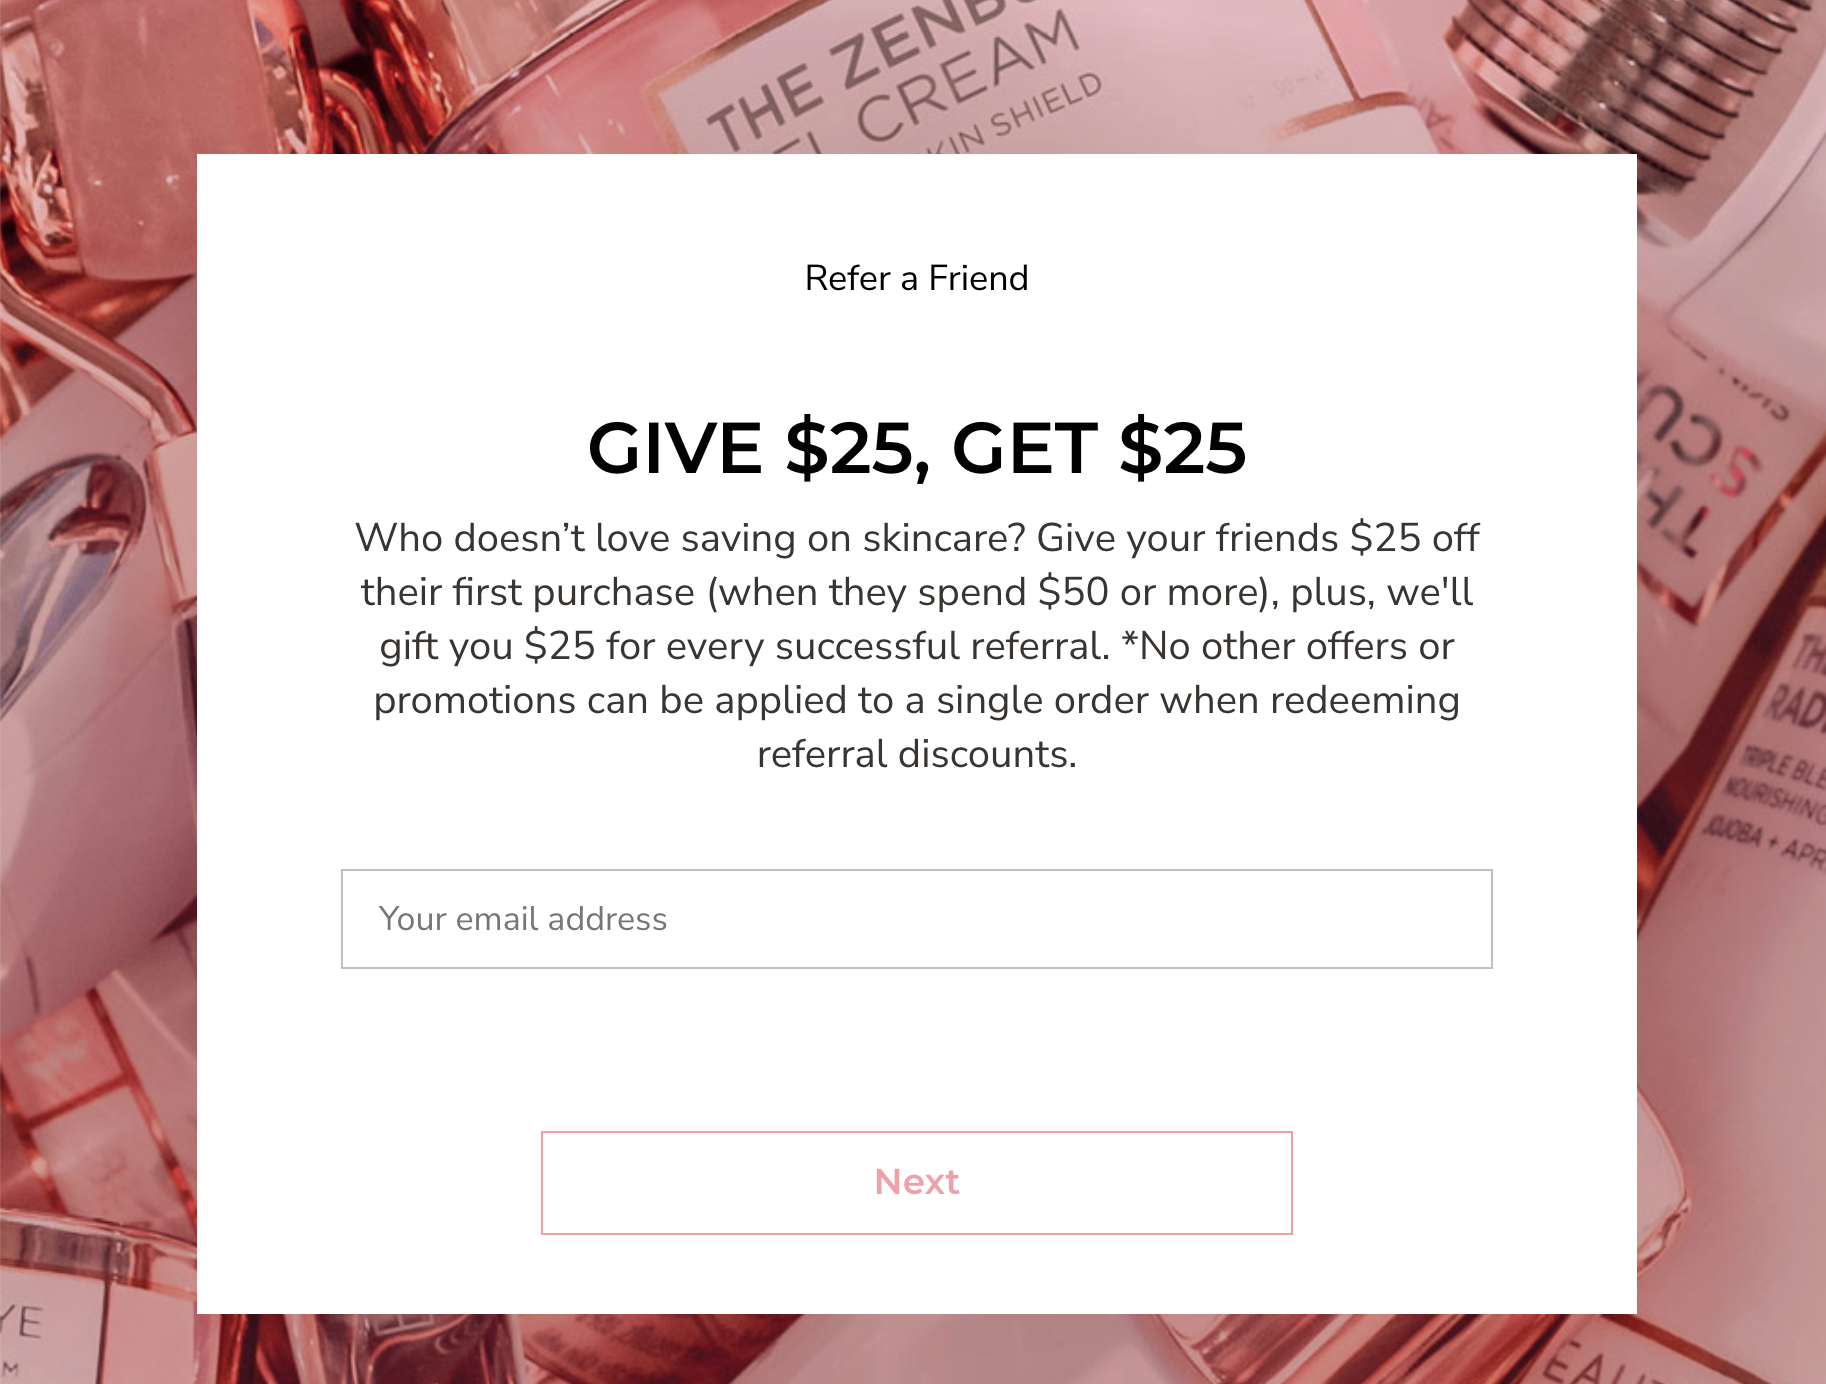 Referral program invitation with a give $25, get $25 incentive to refer new customers.